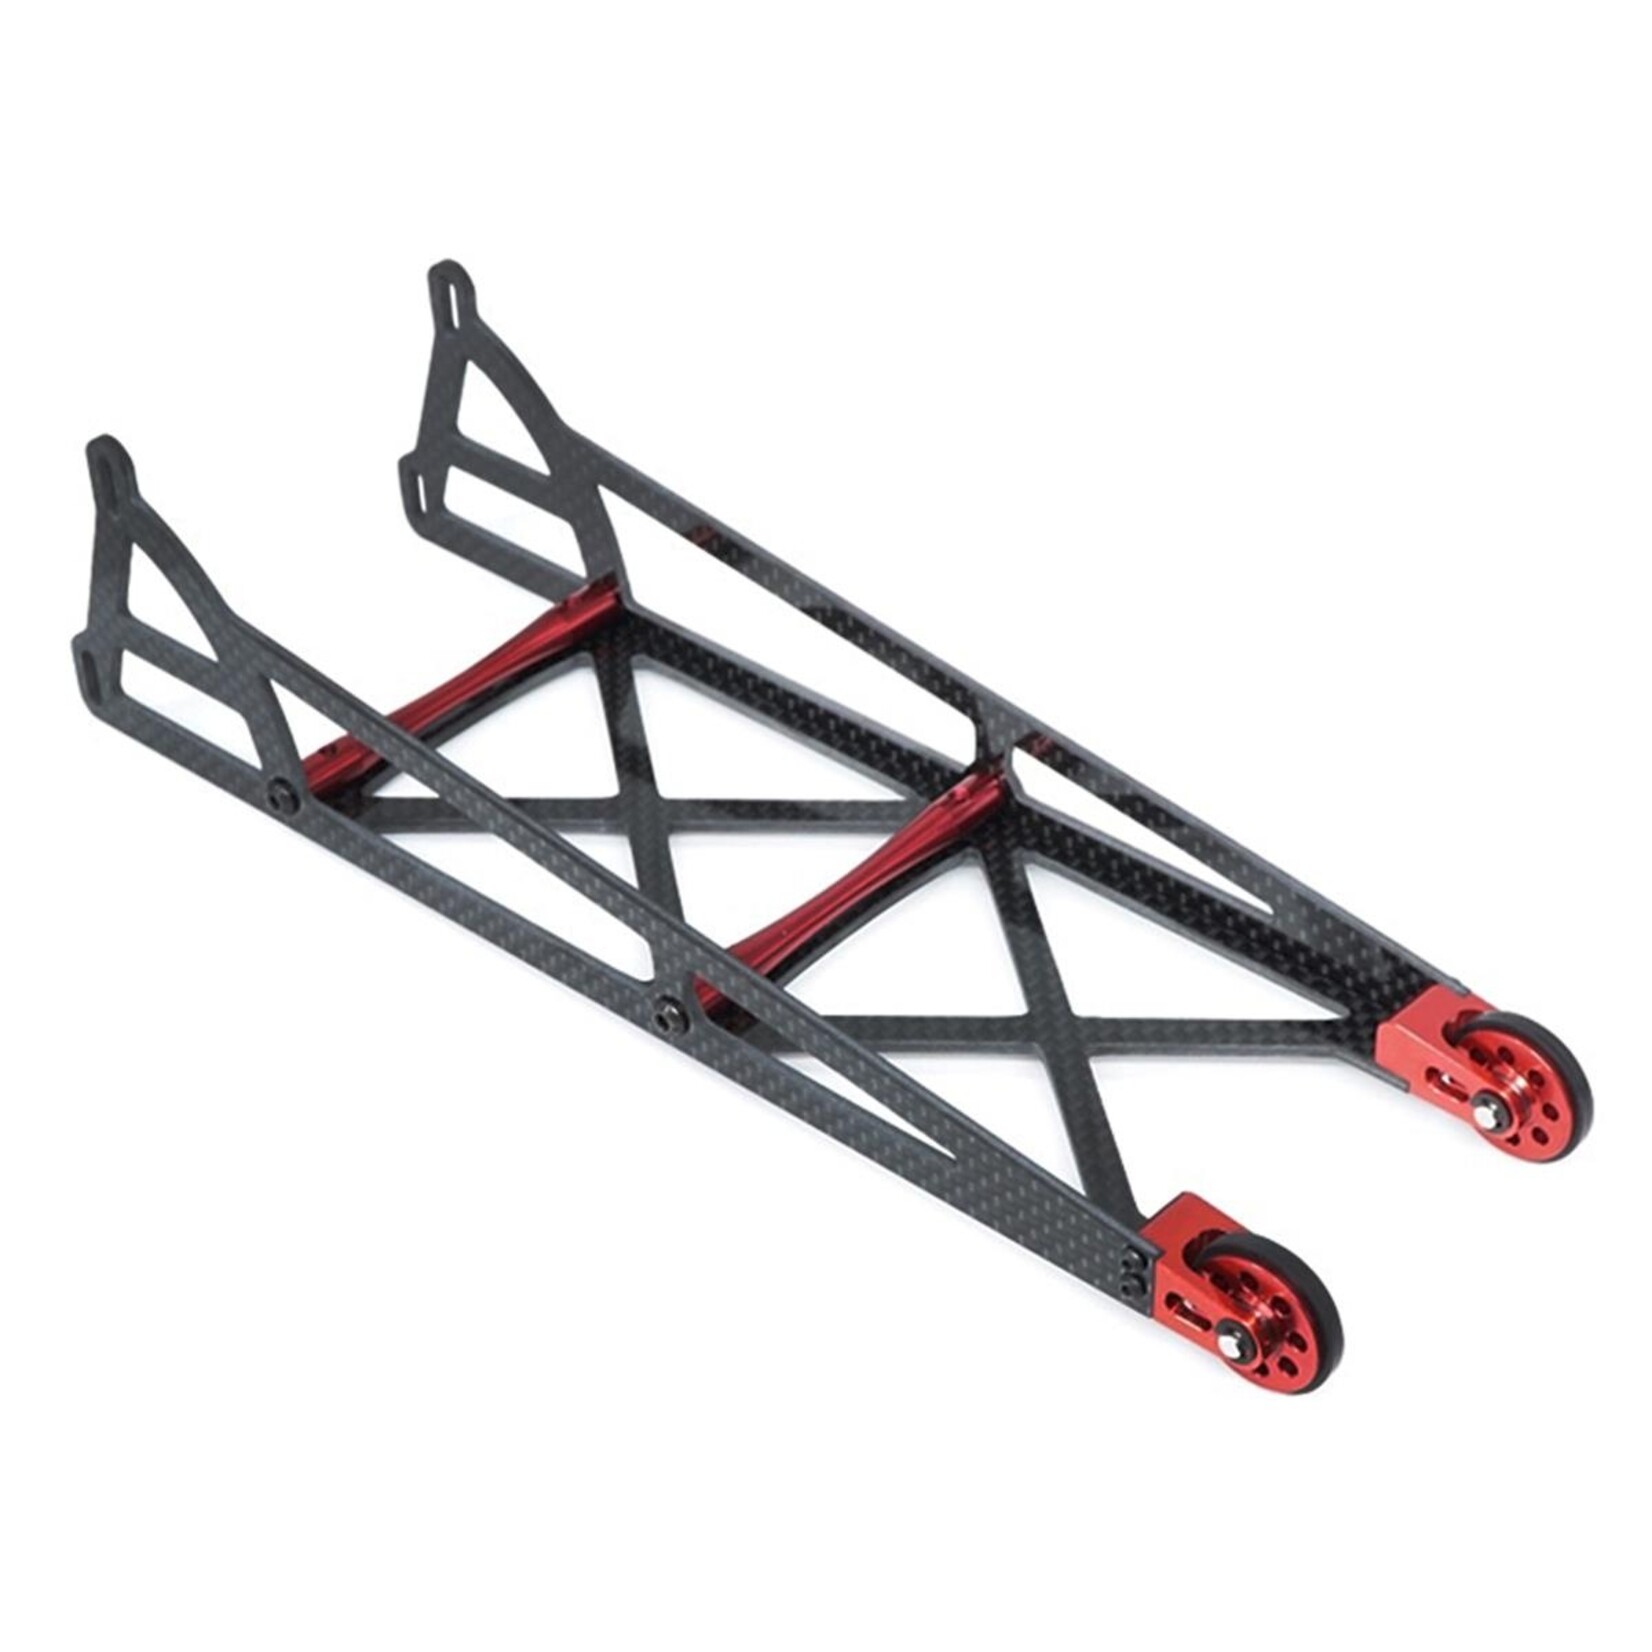 DragRace Concepts DragRace Concepts Slider Wheelie Bar w/O-Ring Wheels (Red) #355-0001